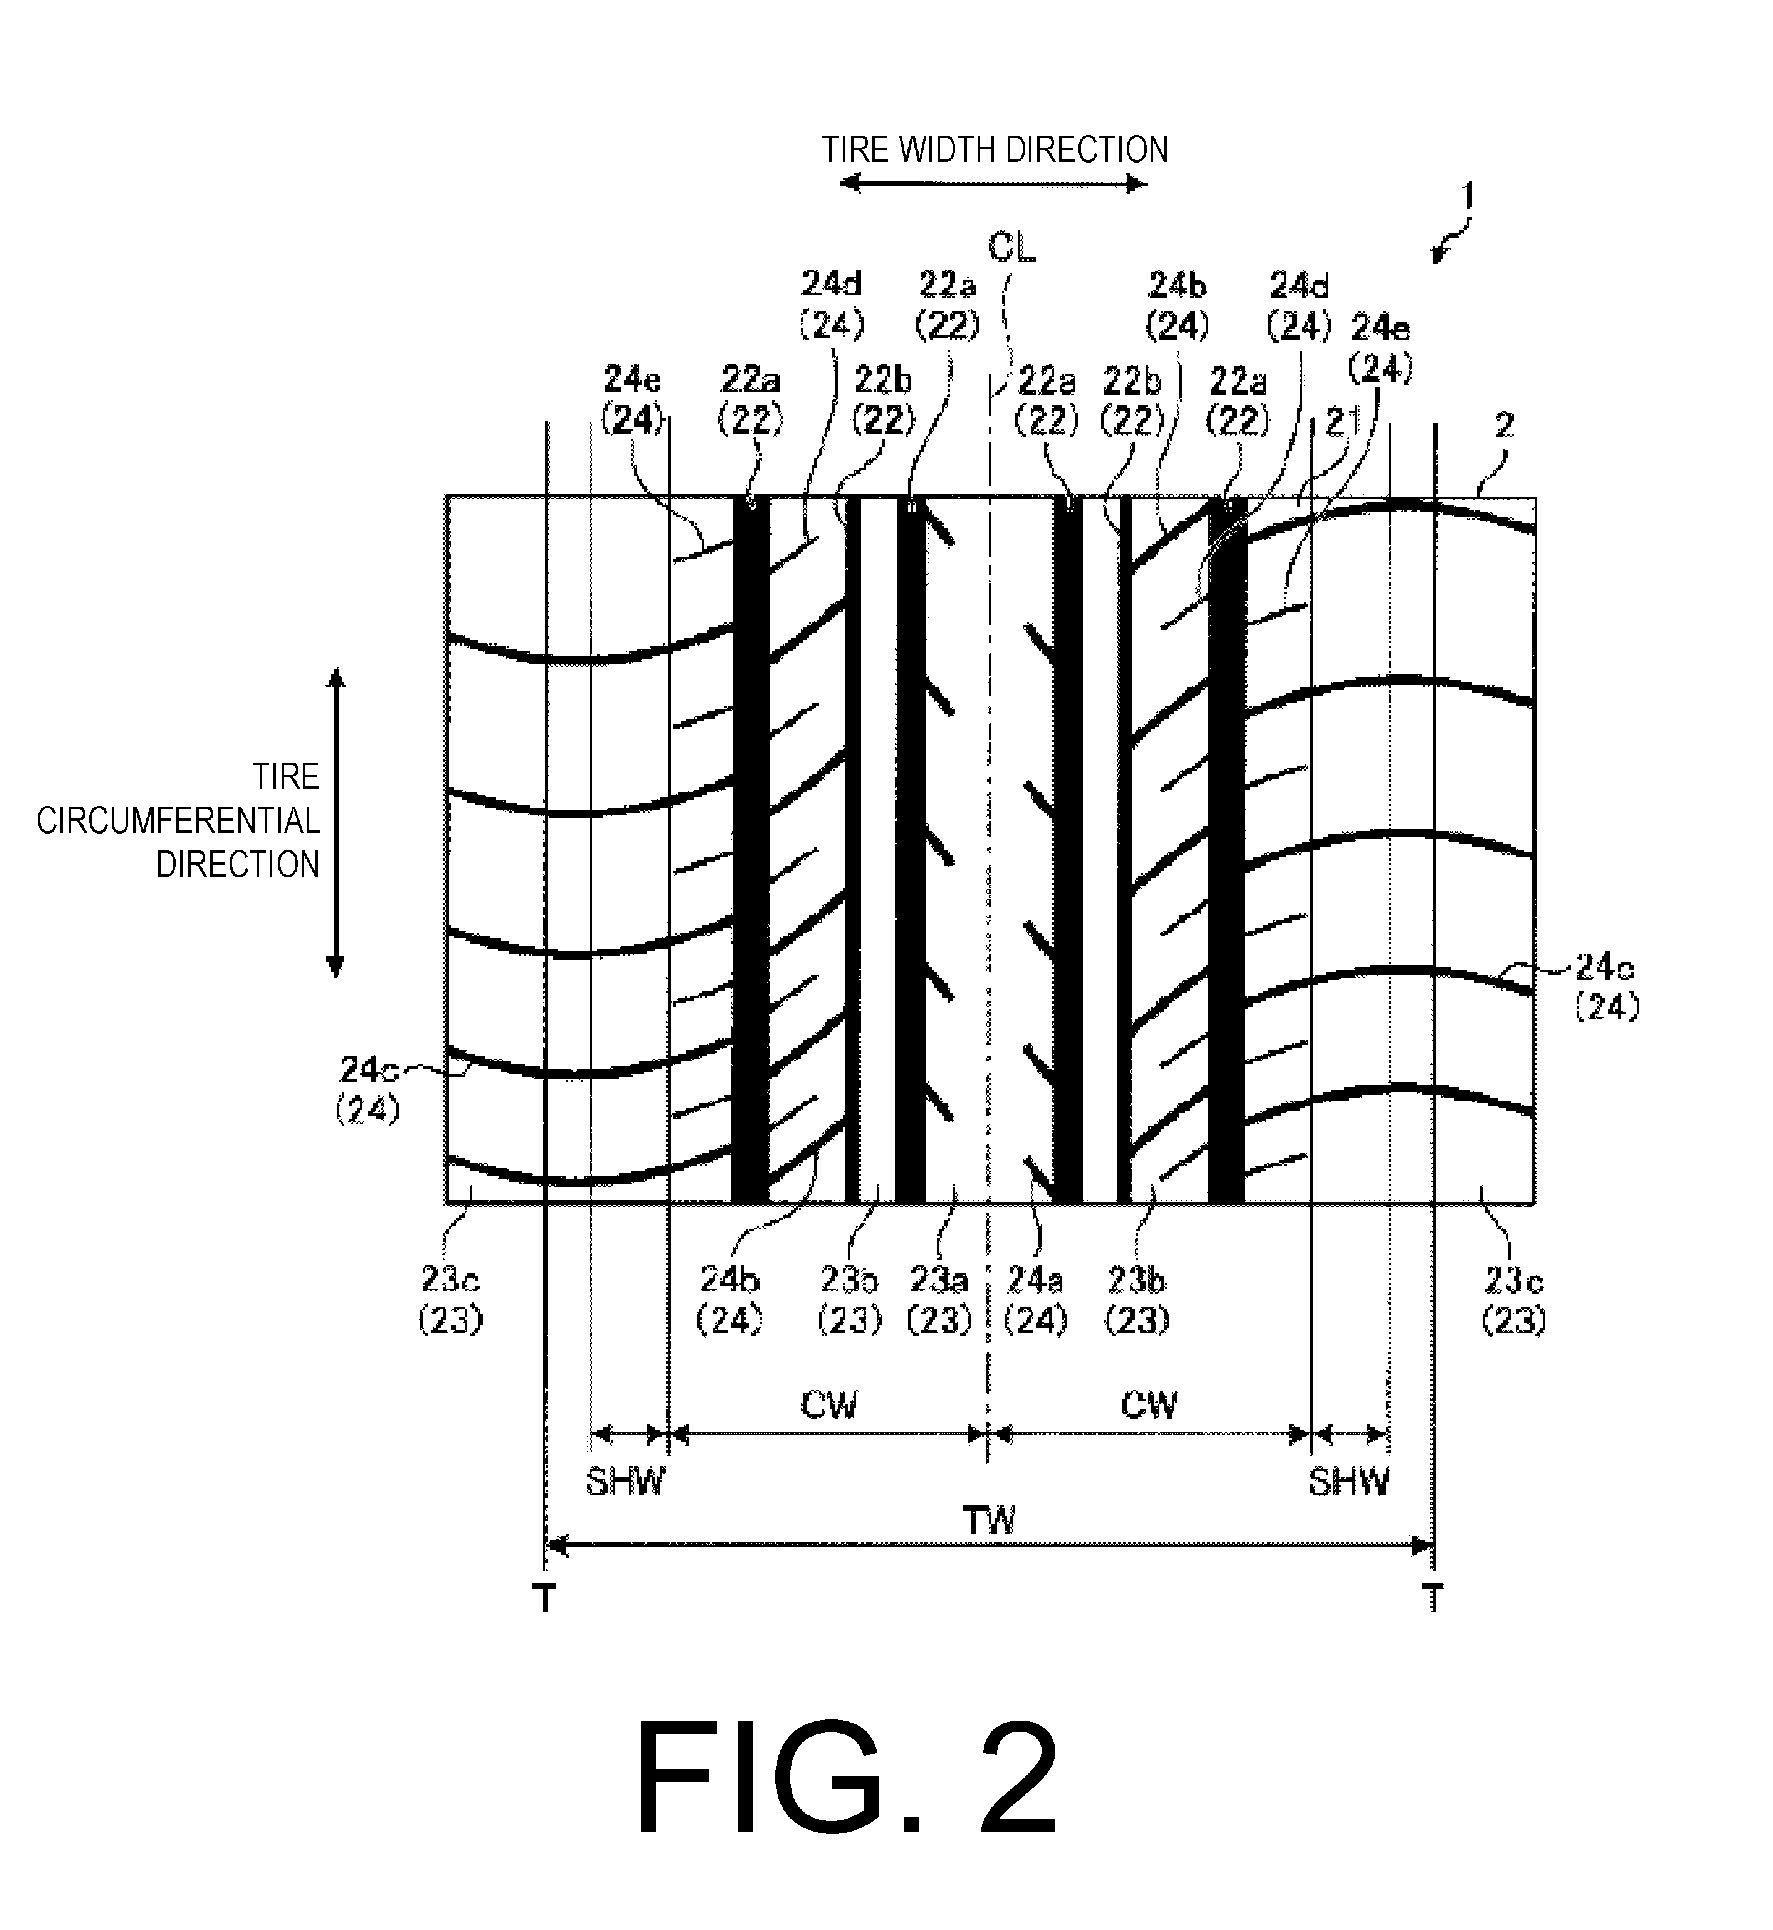 Pneumatic tire with tread having different curvature radii